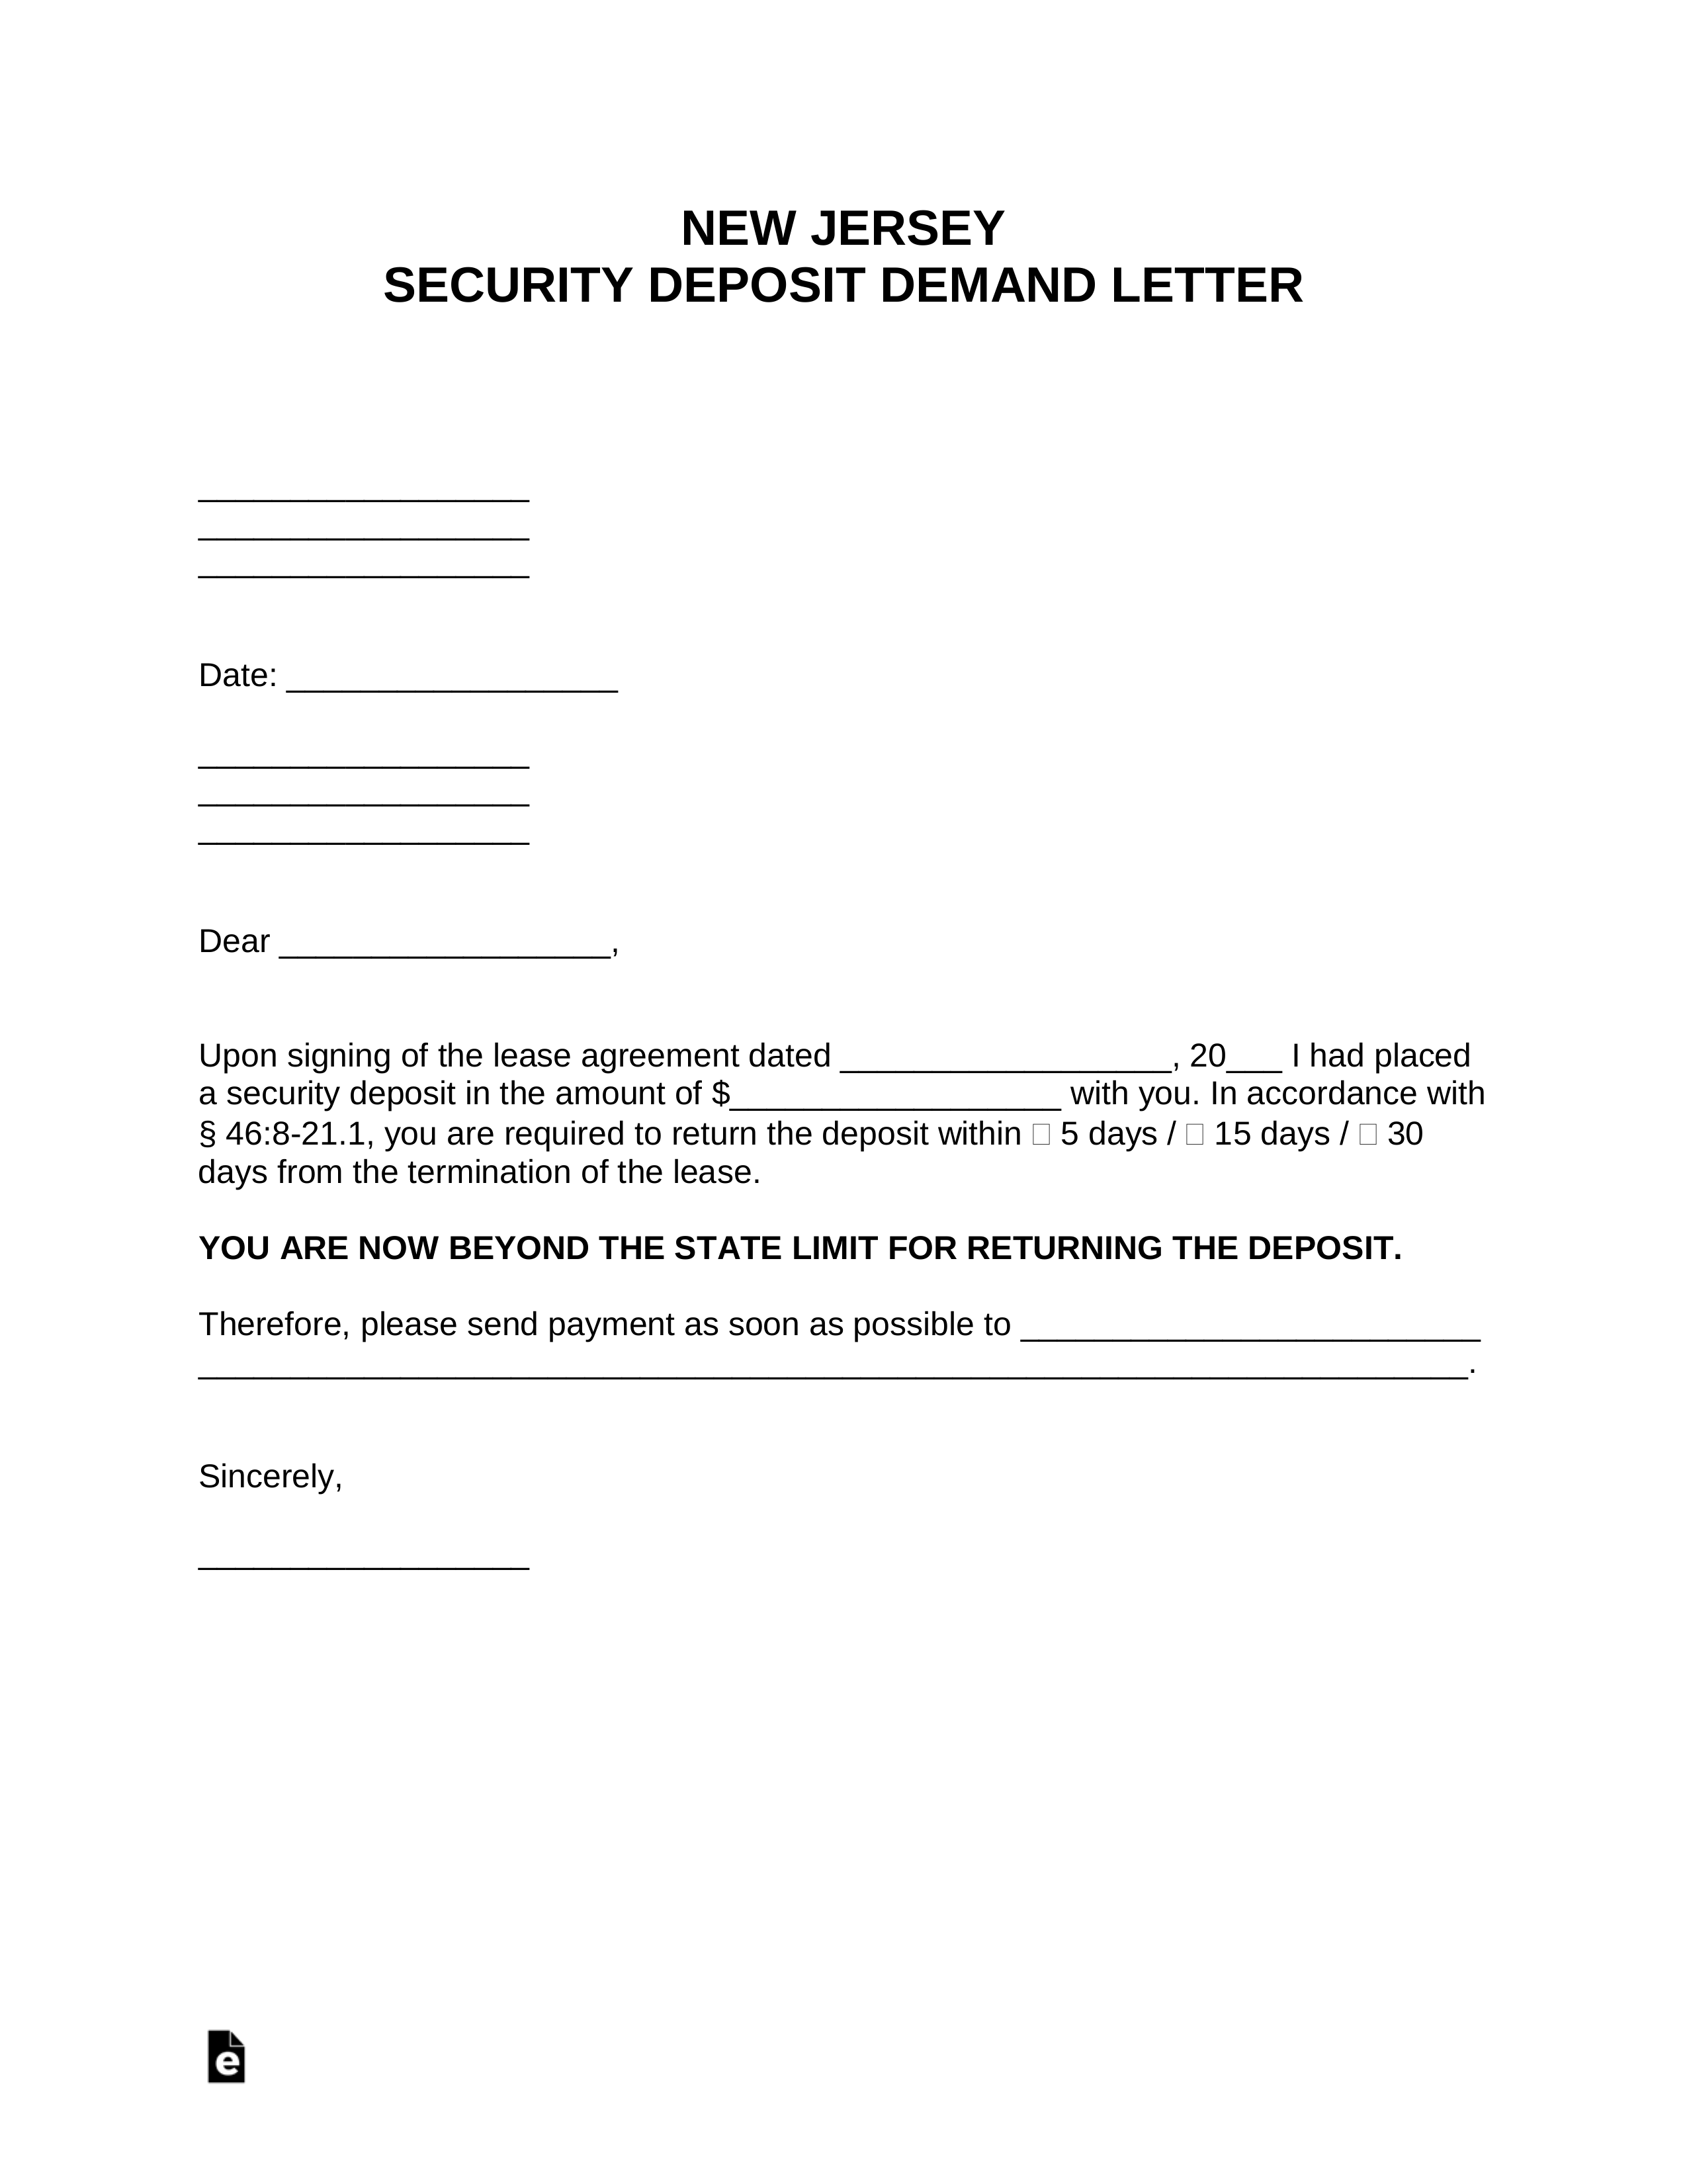 Free New Jersey Security Deposit Demand Letter - PDF  Word – eForms Pertaining To Security Deposit Demand Letter Template Regarding Security Deposit Demand Letter Template